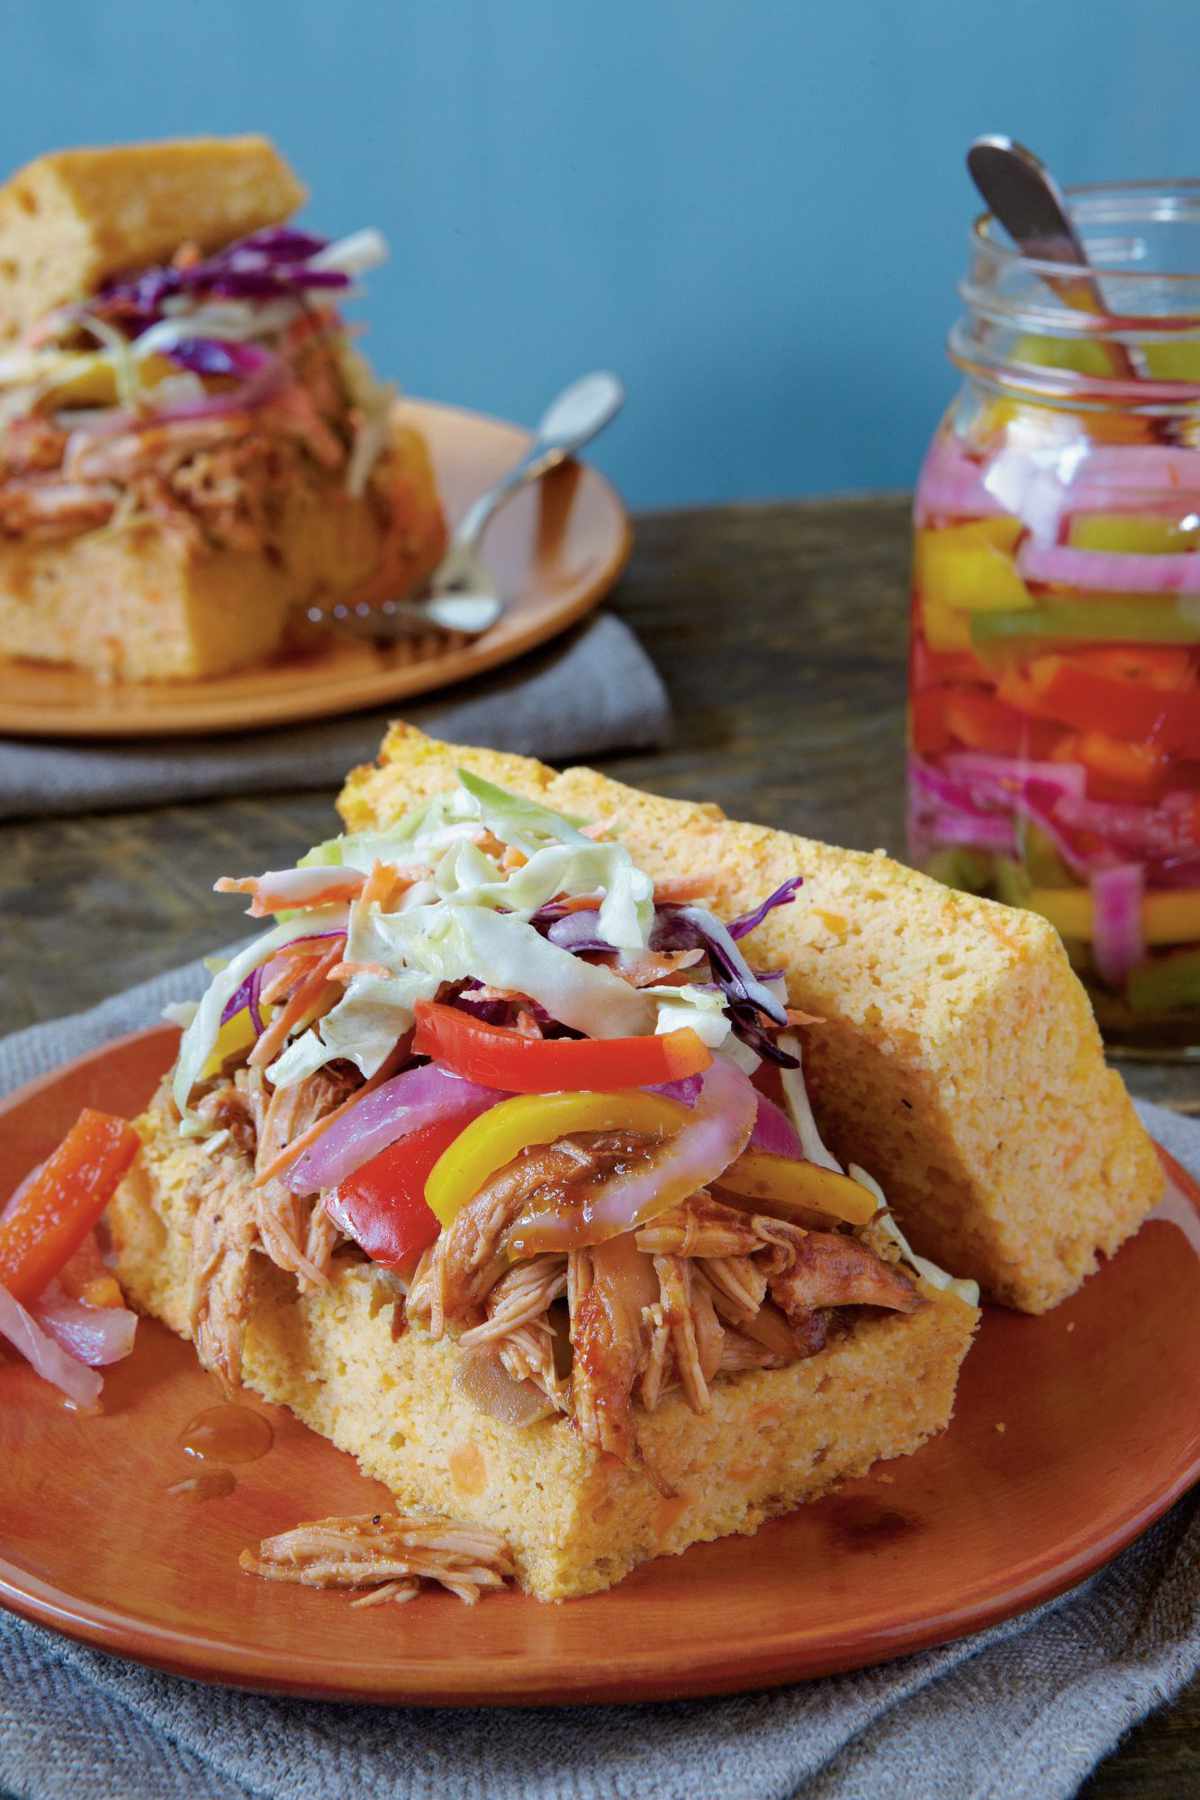 Slow-Cooked Barbecued Chicken Sandwiches